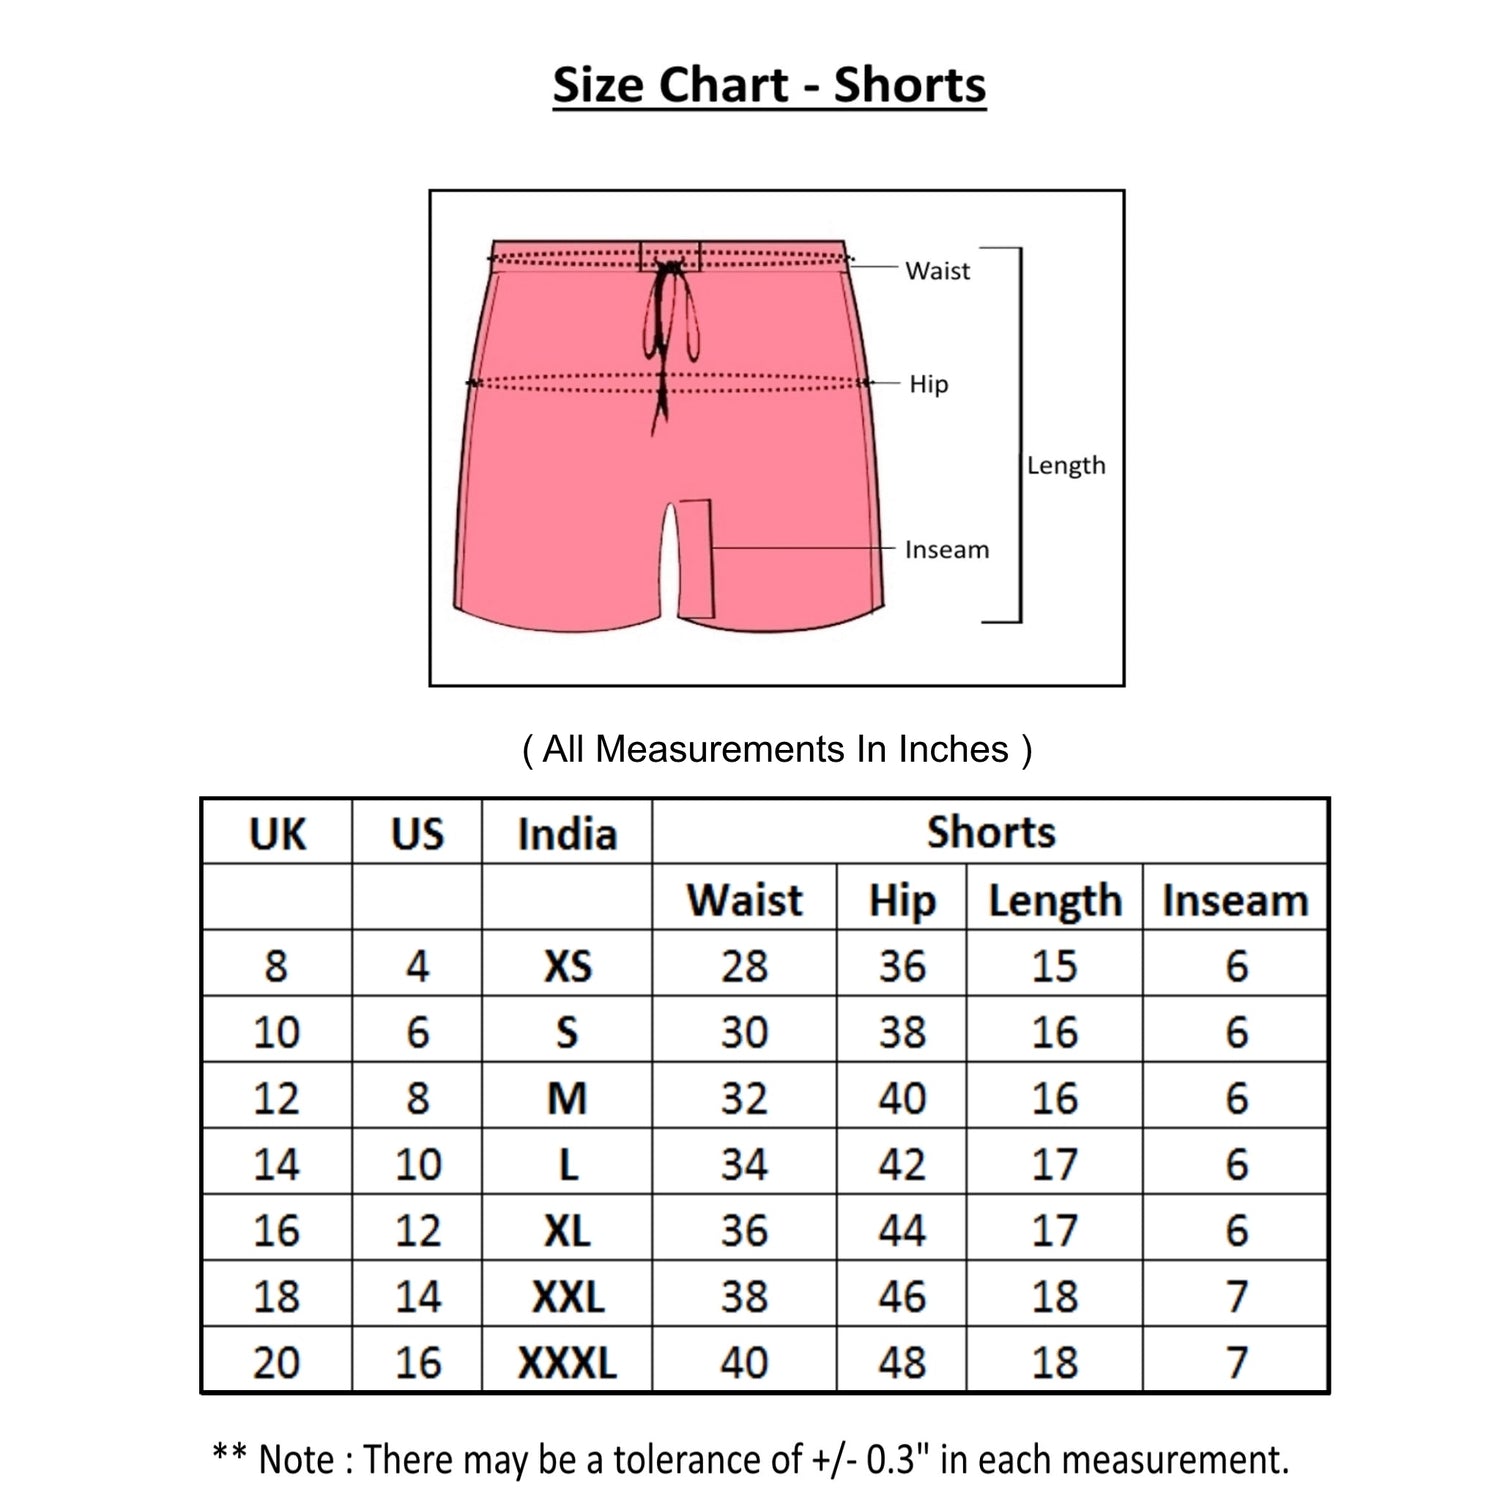 size chart for shorts for all sizes from small to plus sizes